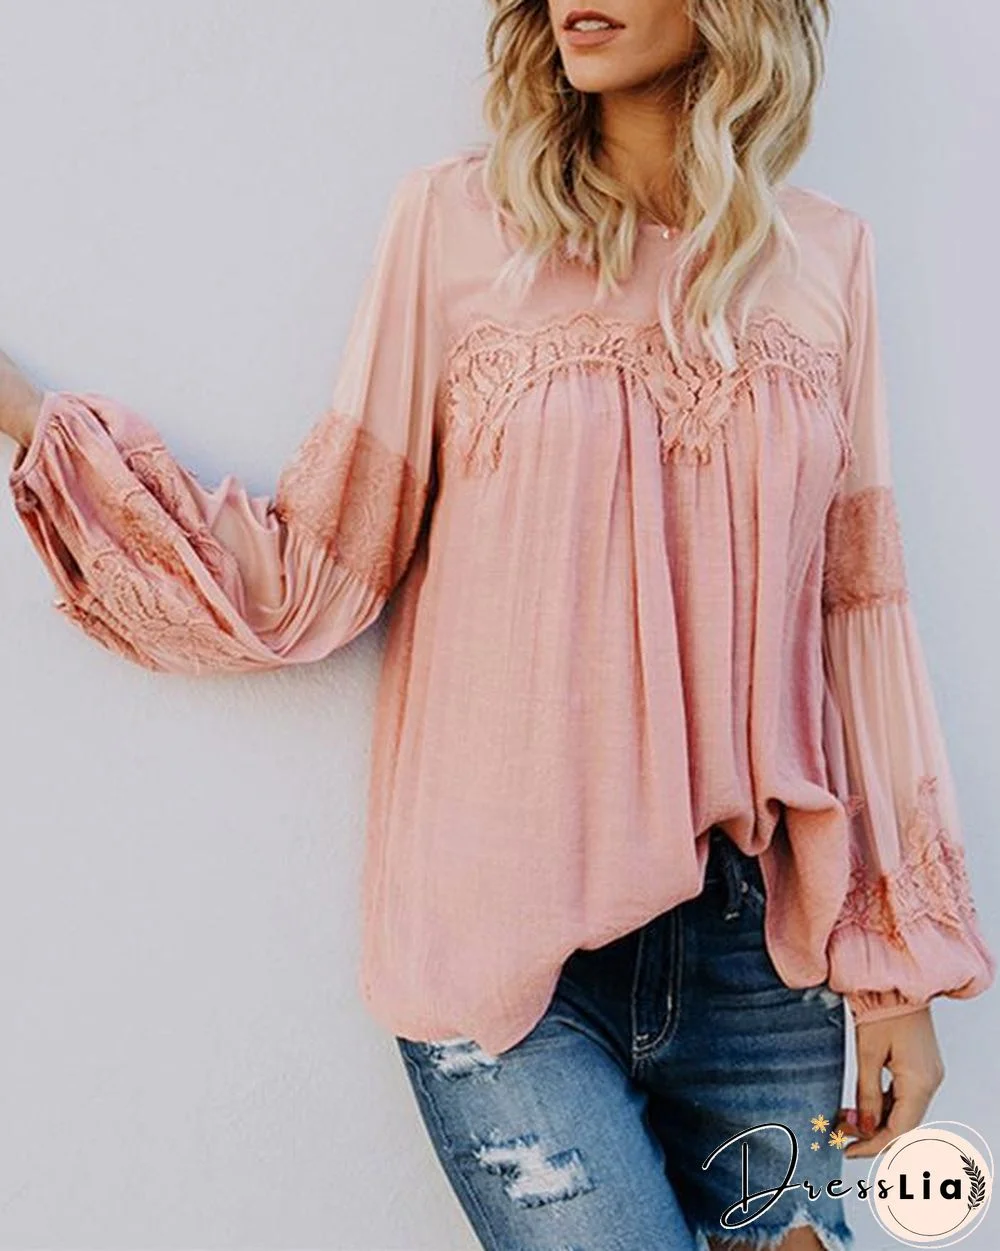 Women Casual Lace Embroidery Long Sleeve Solid Plus Size Blouses Tops